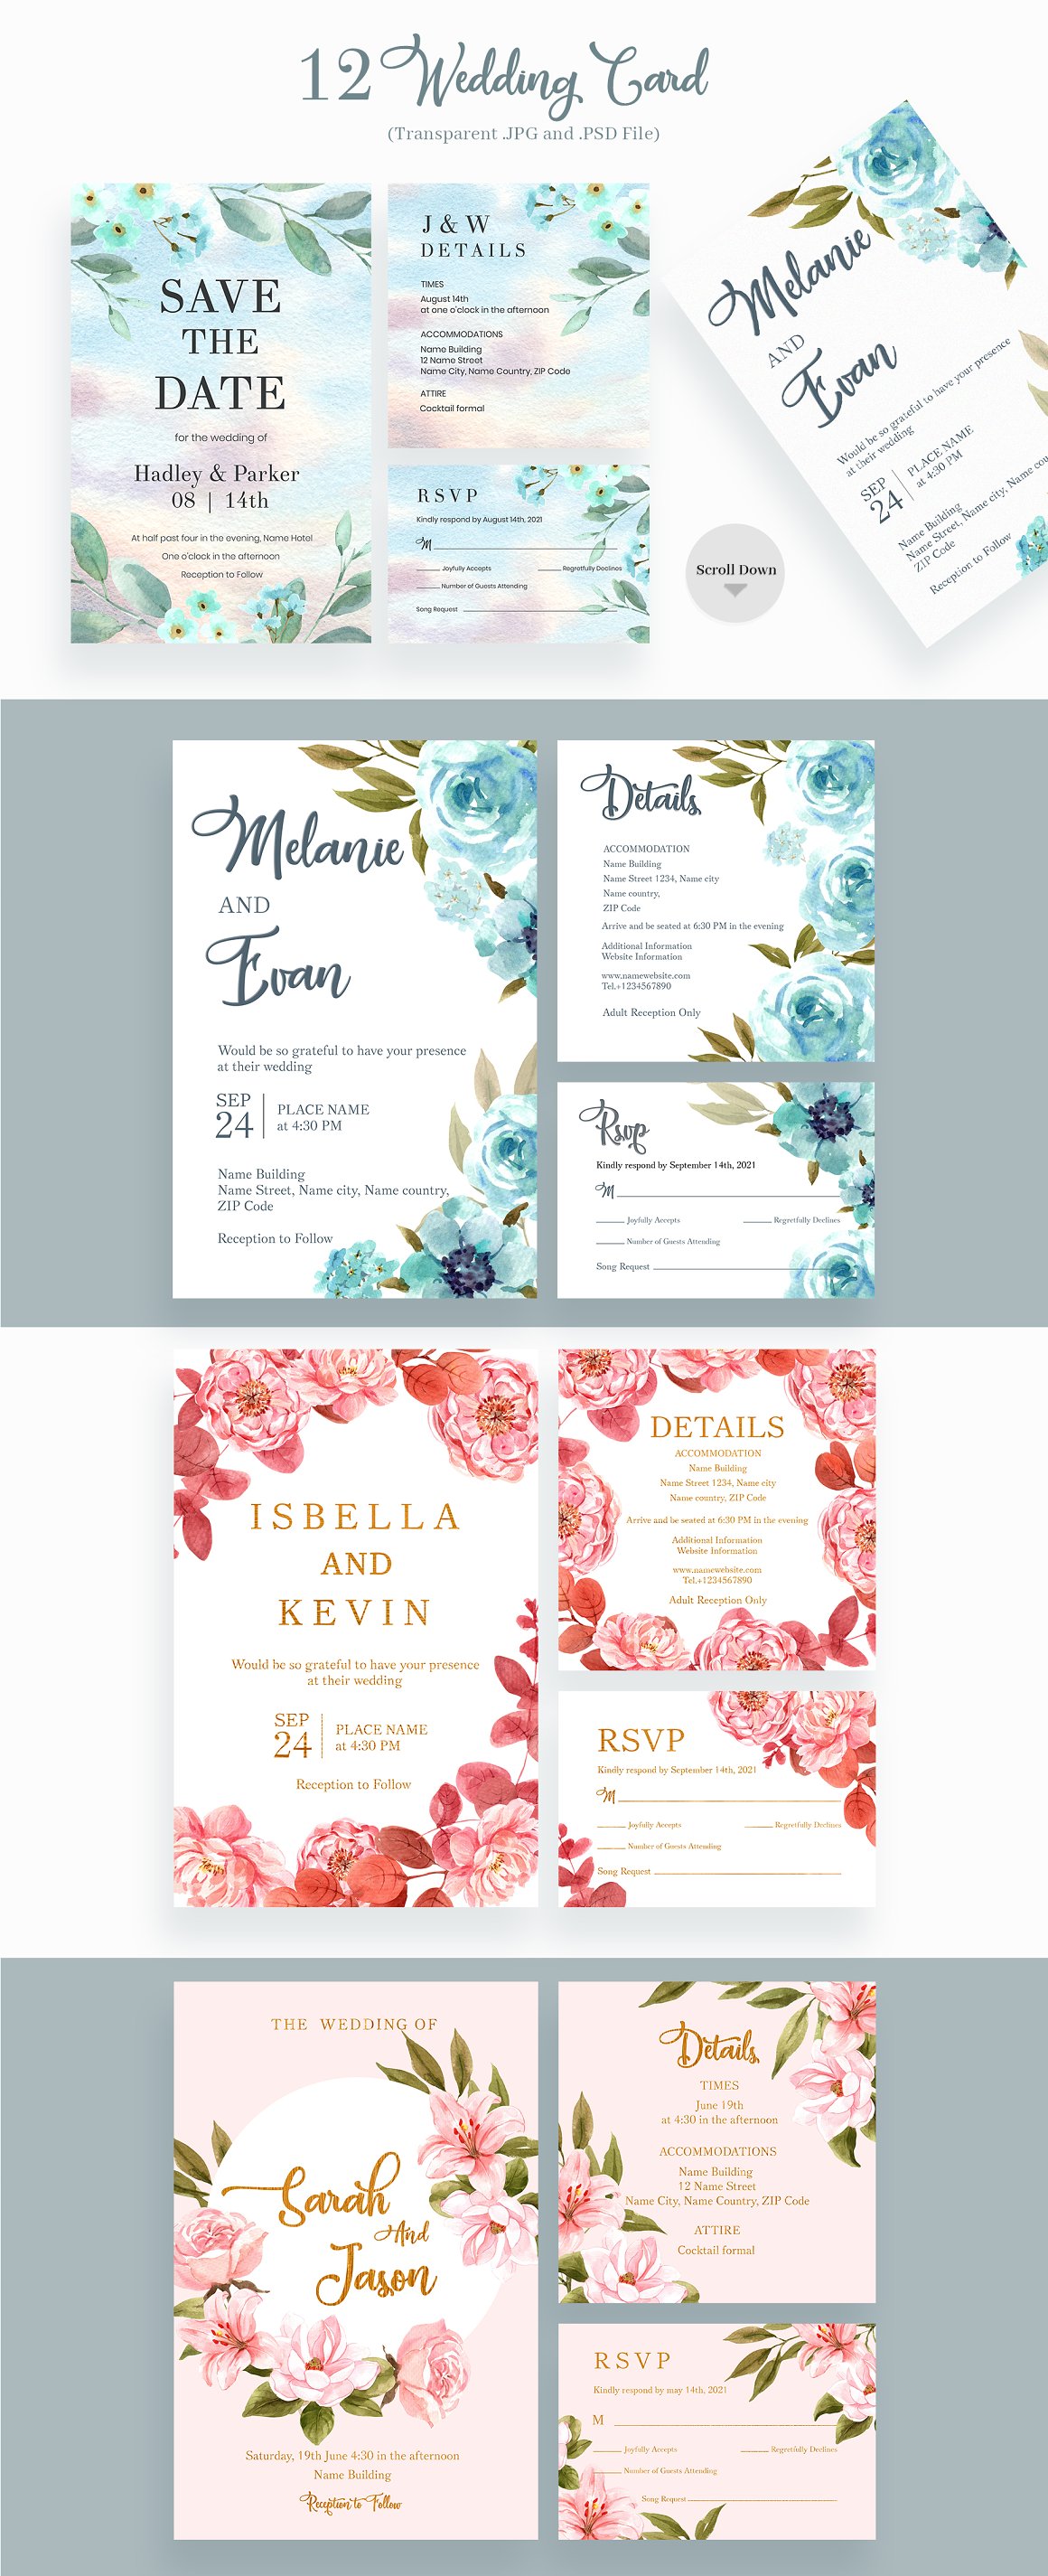 Colorful of flowers wedding card.